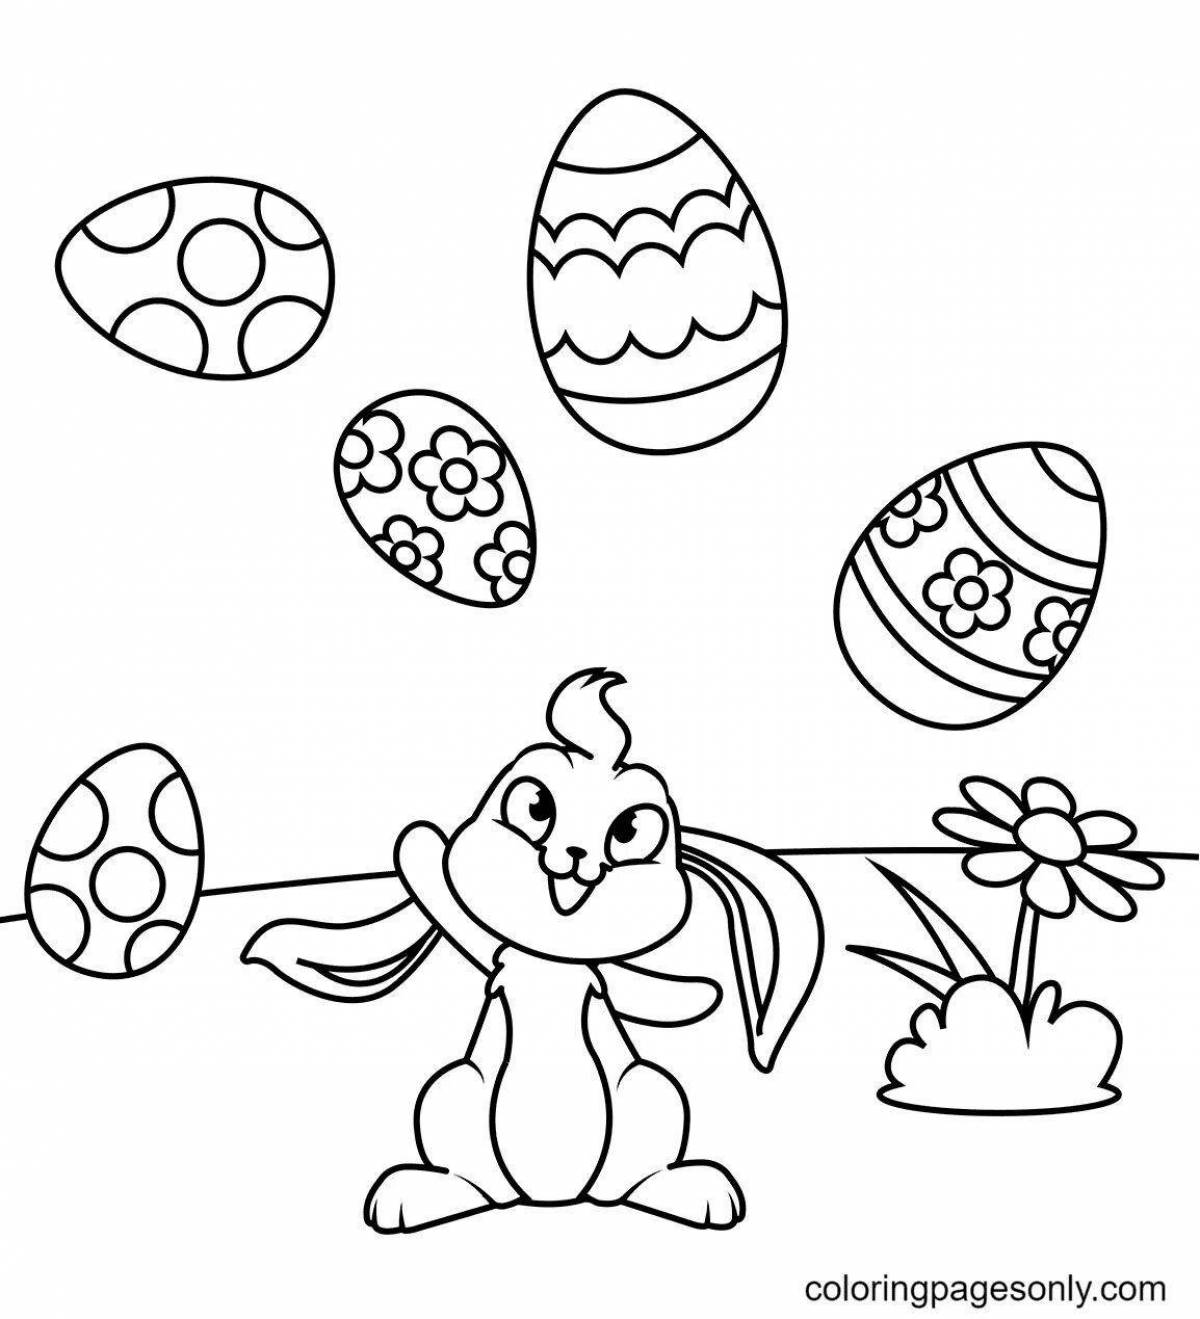 Coloured easter coloring book for children